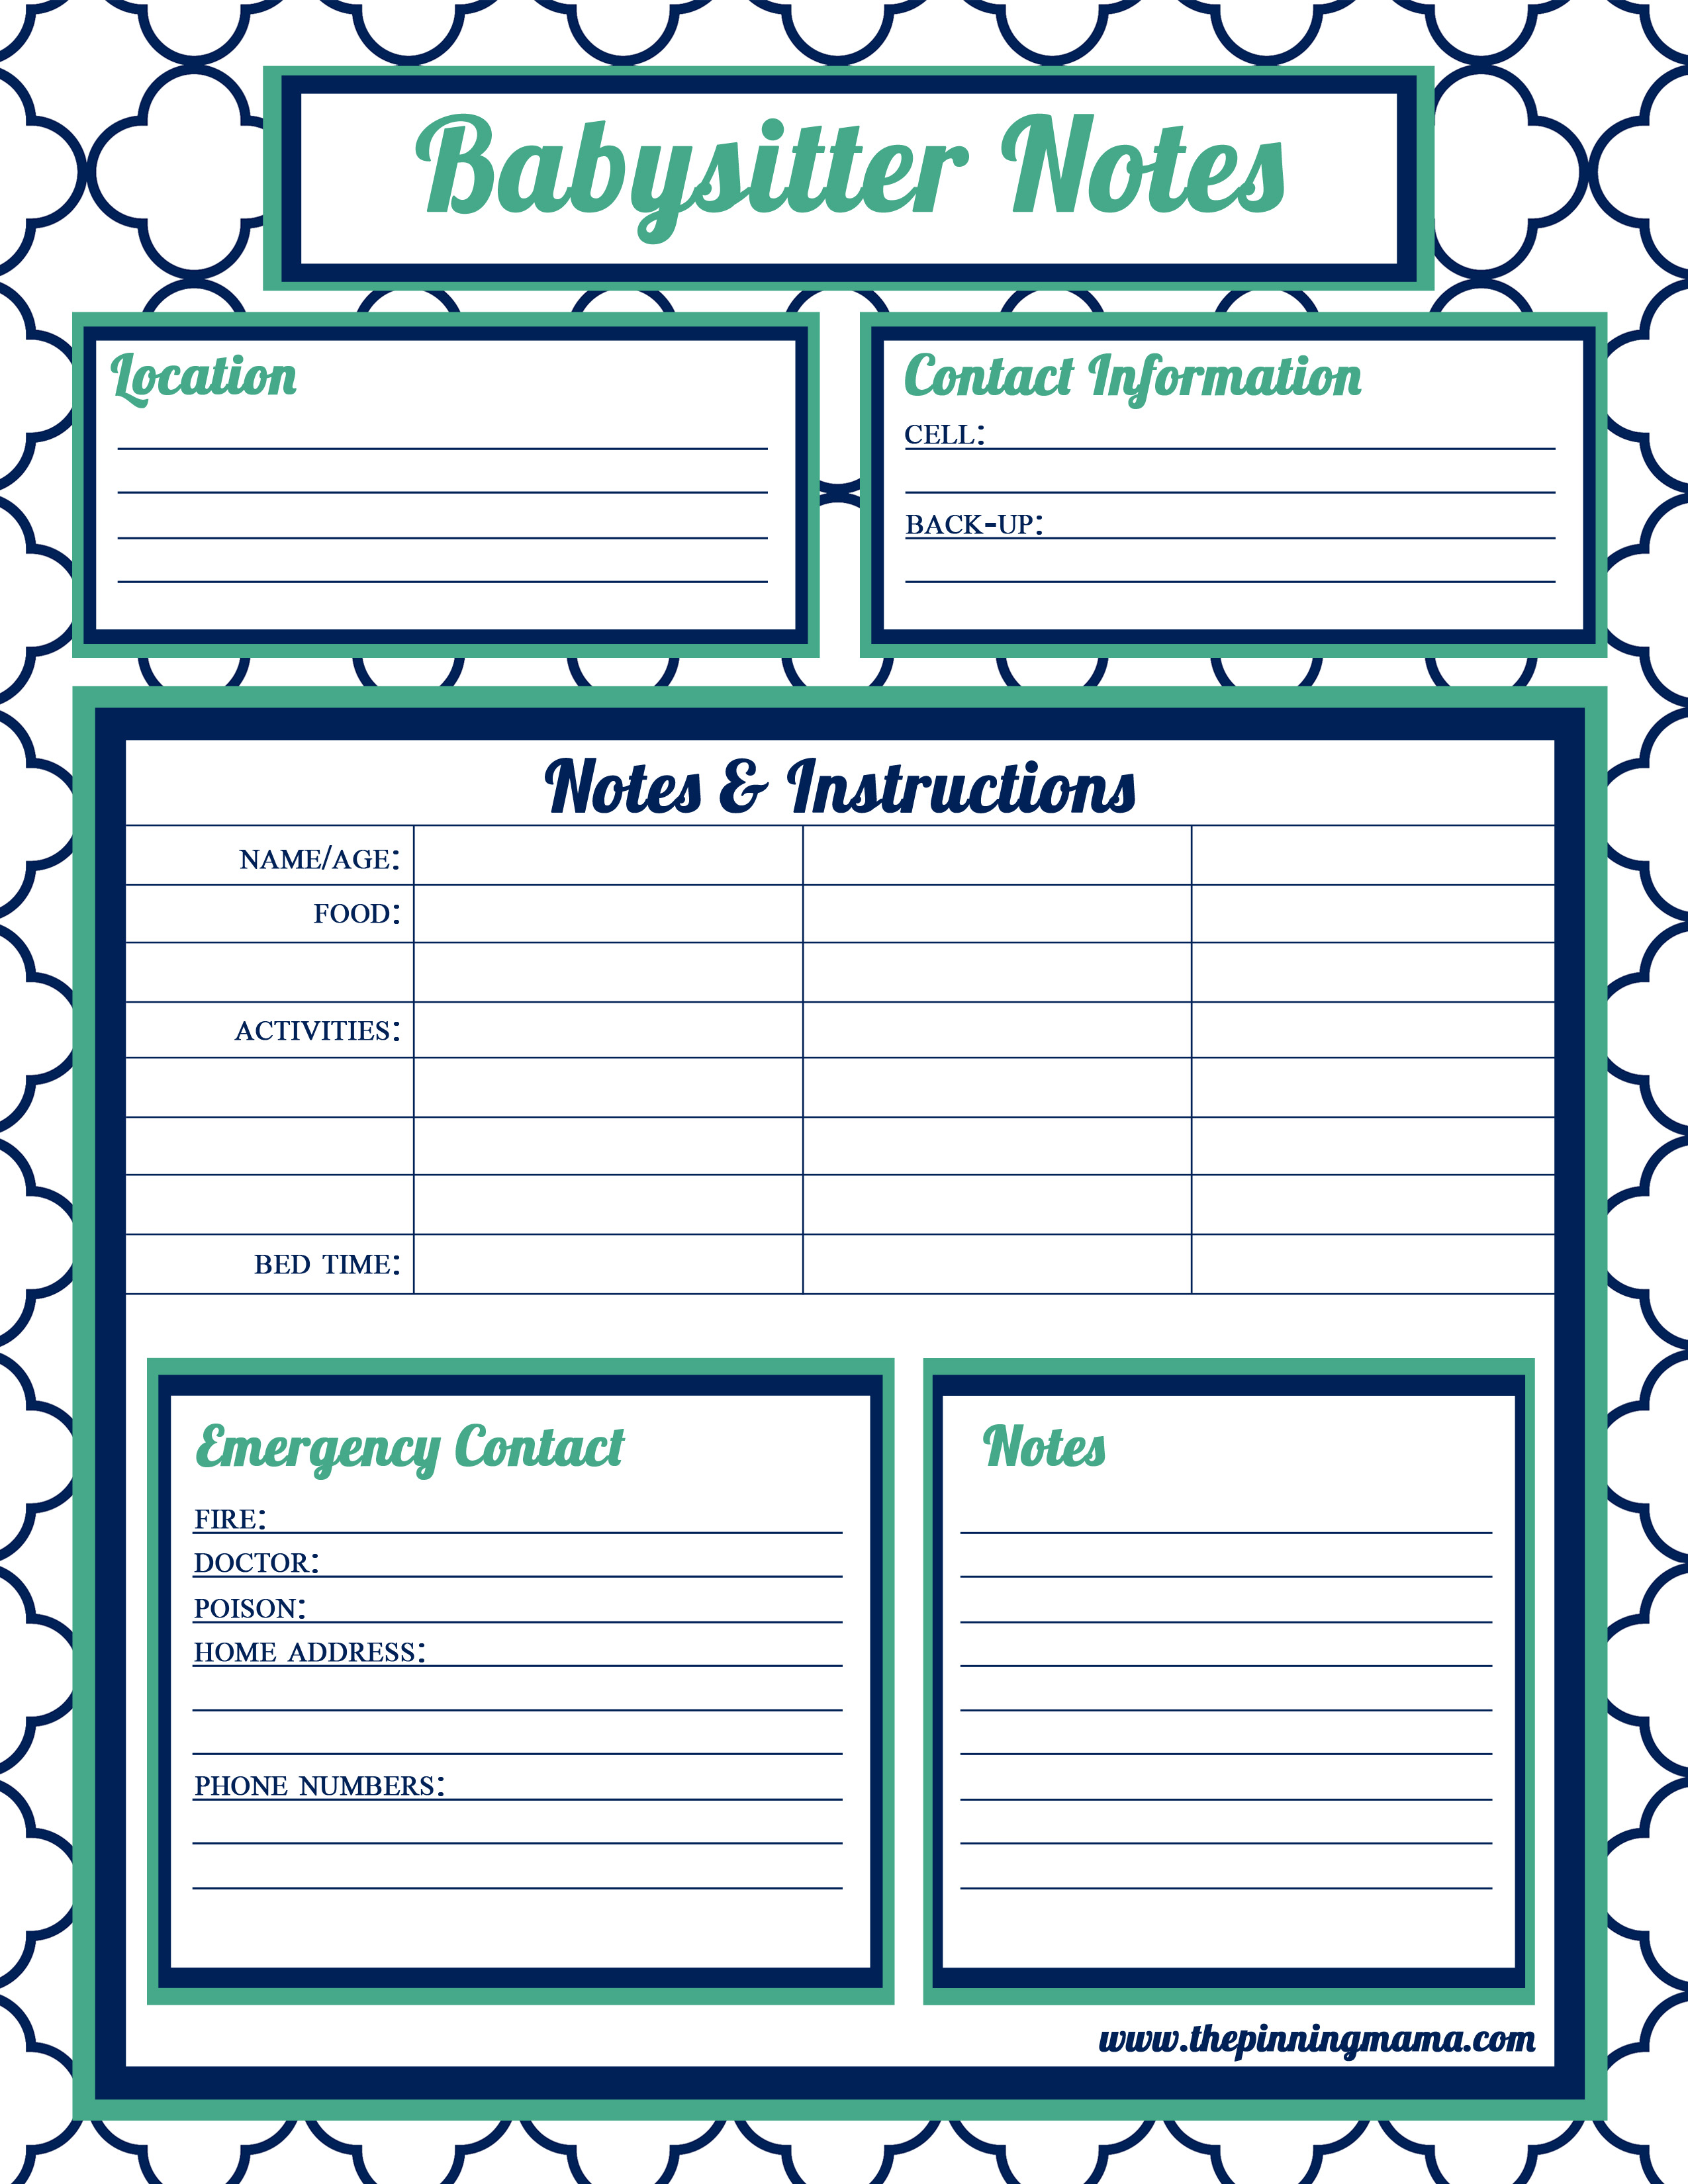 printable-babysitting-forms-printable-forms-free-online